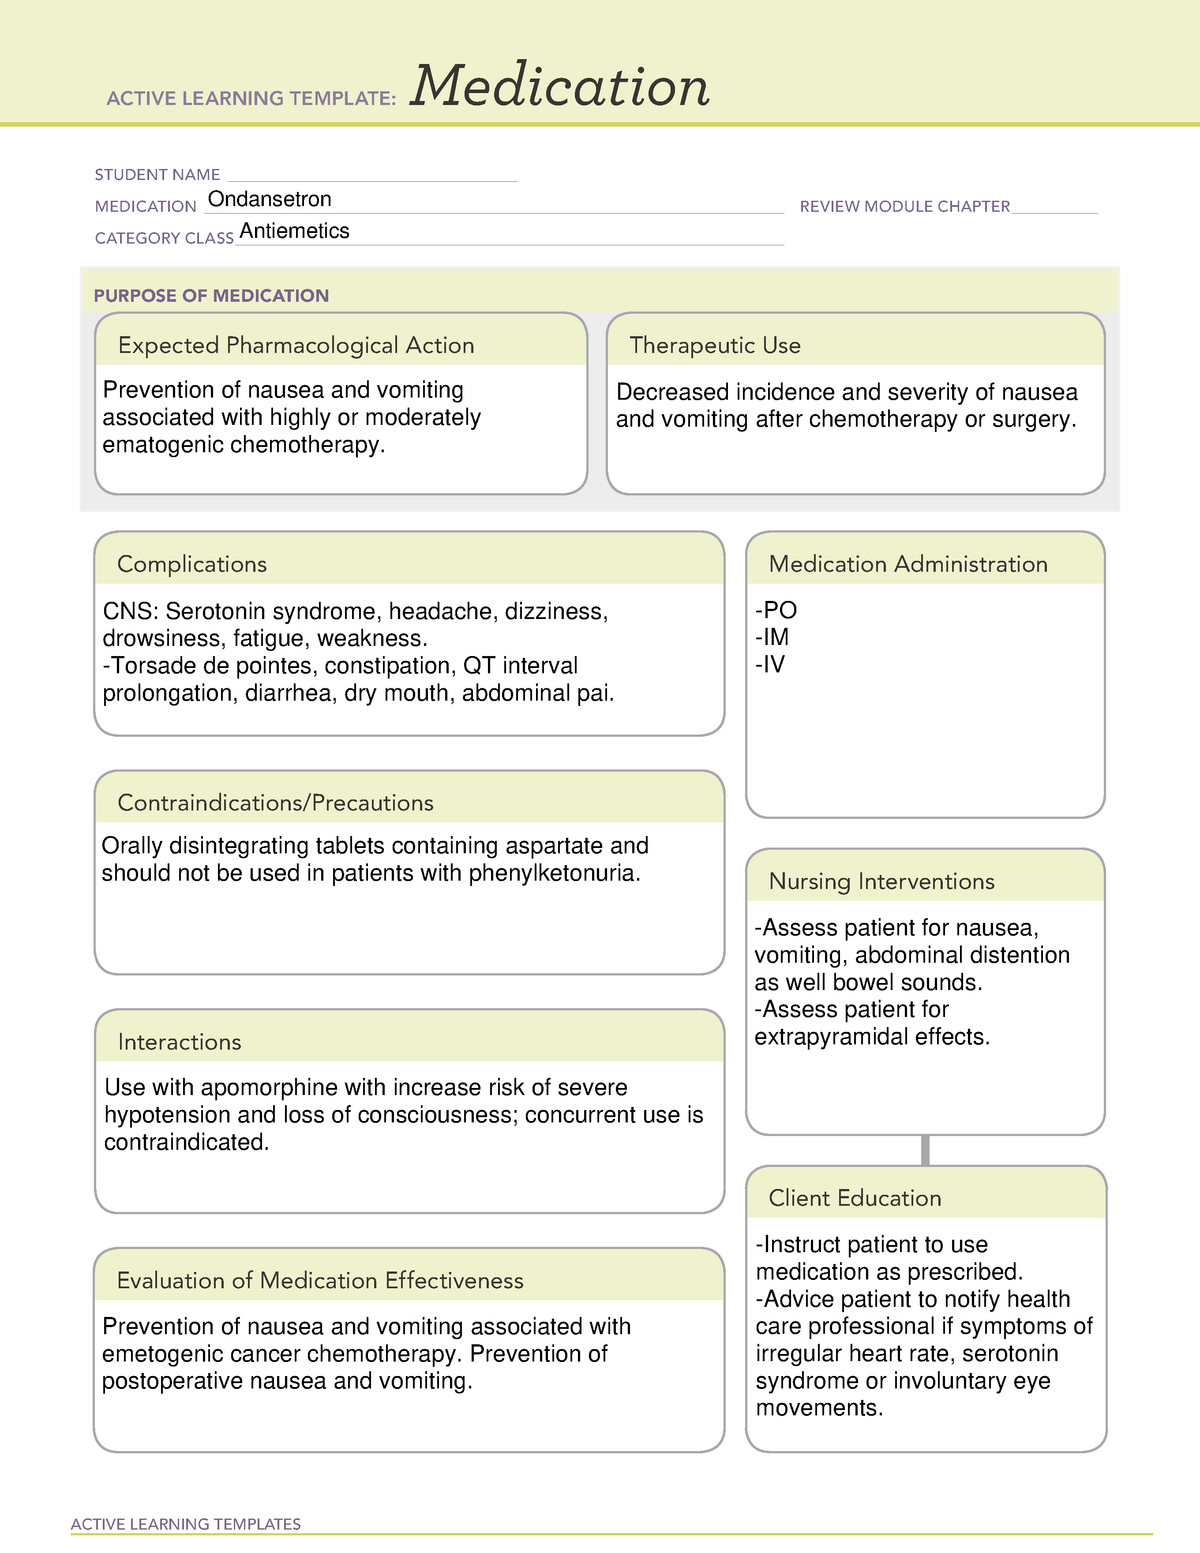 Ondansetron med ATI template medications. ACTIVE LEARNING TEMPLATES